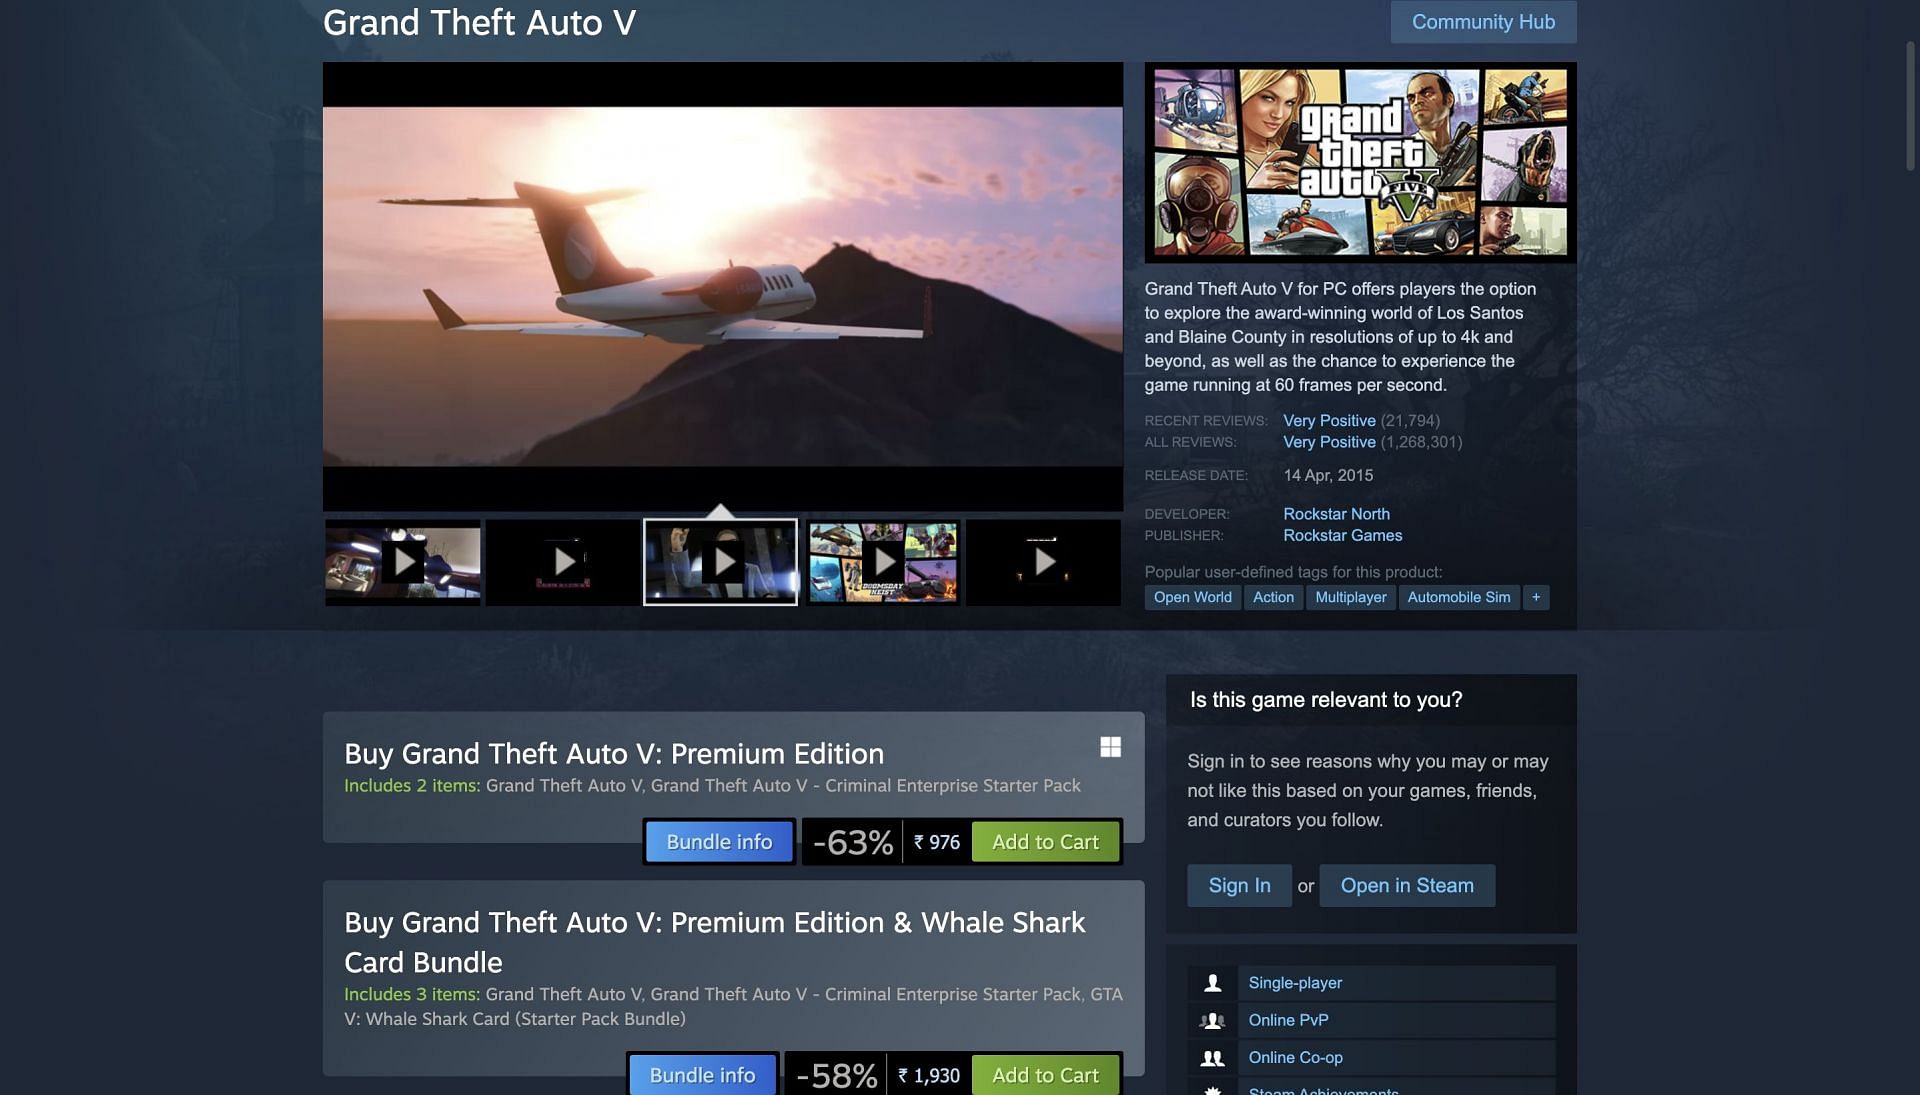 The game is also available on Steam (Image via Steam)